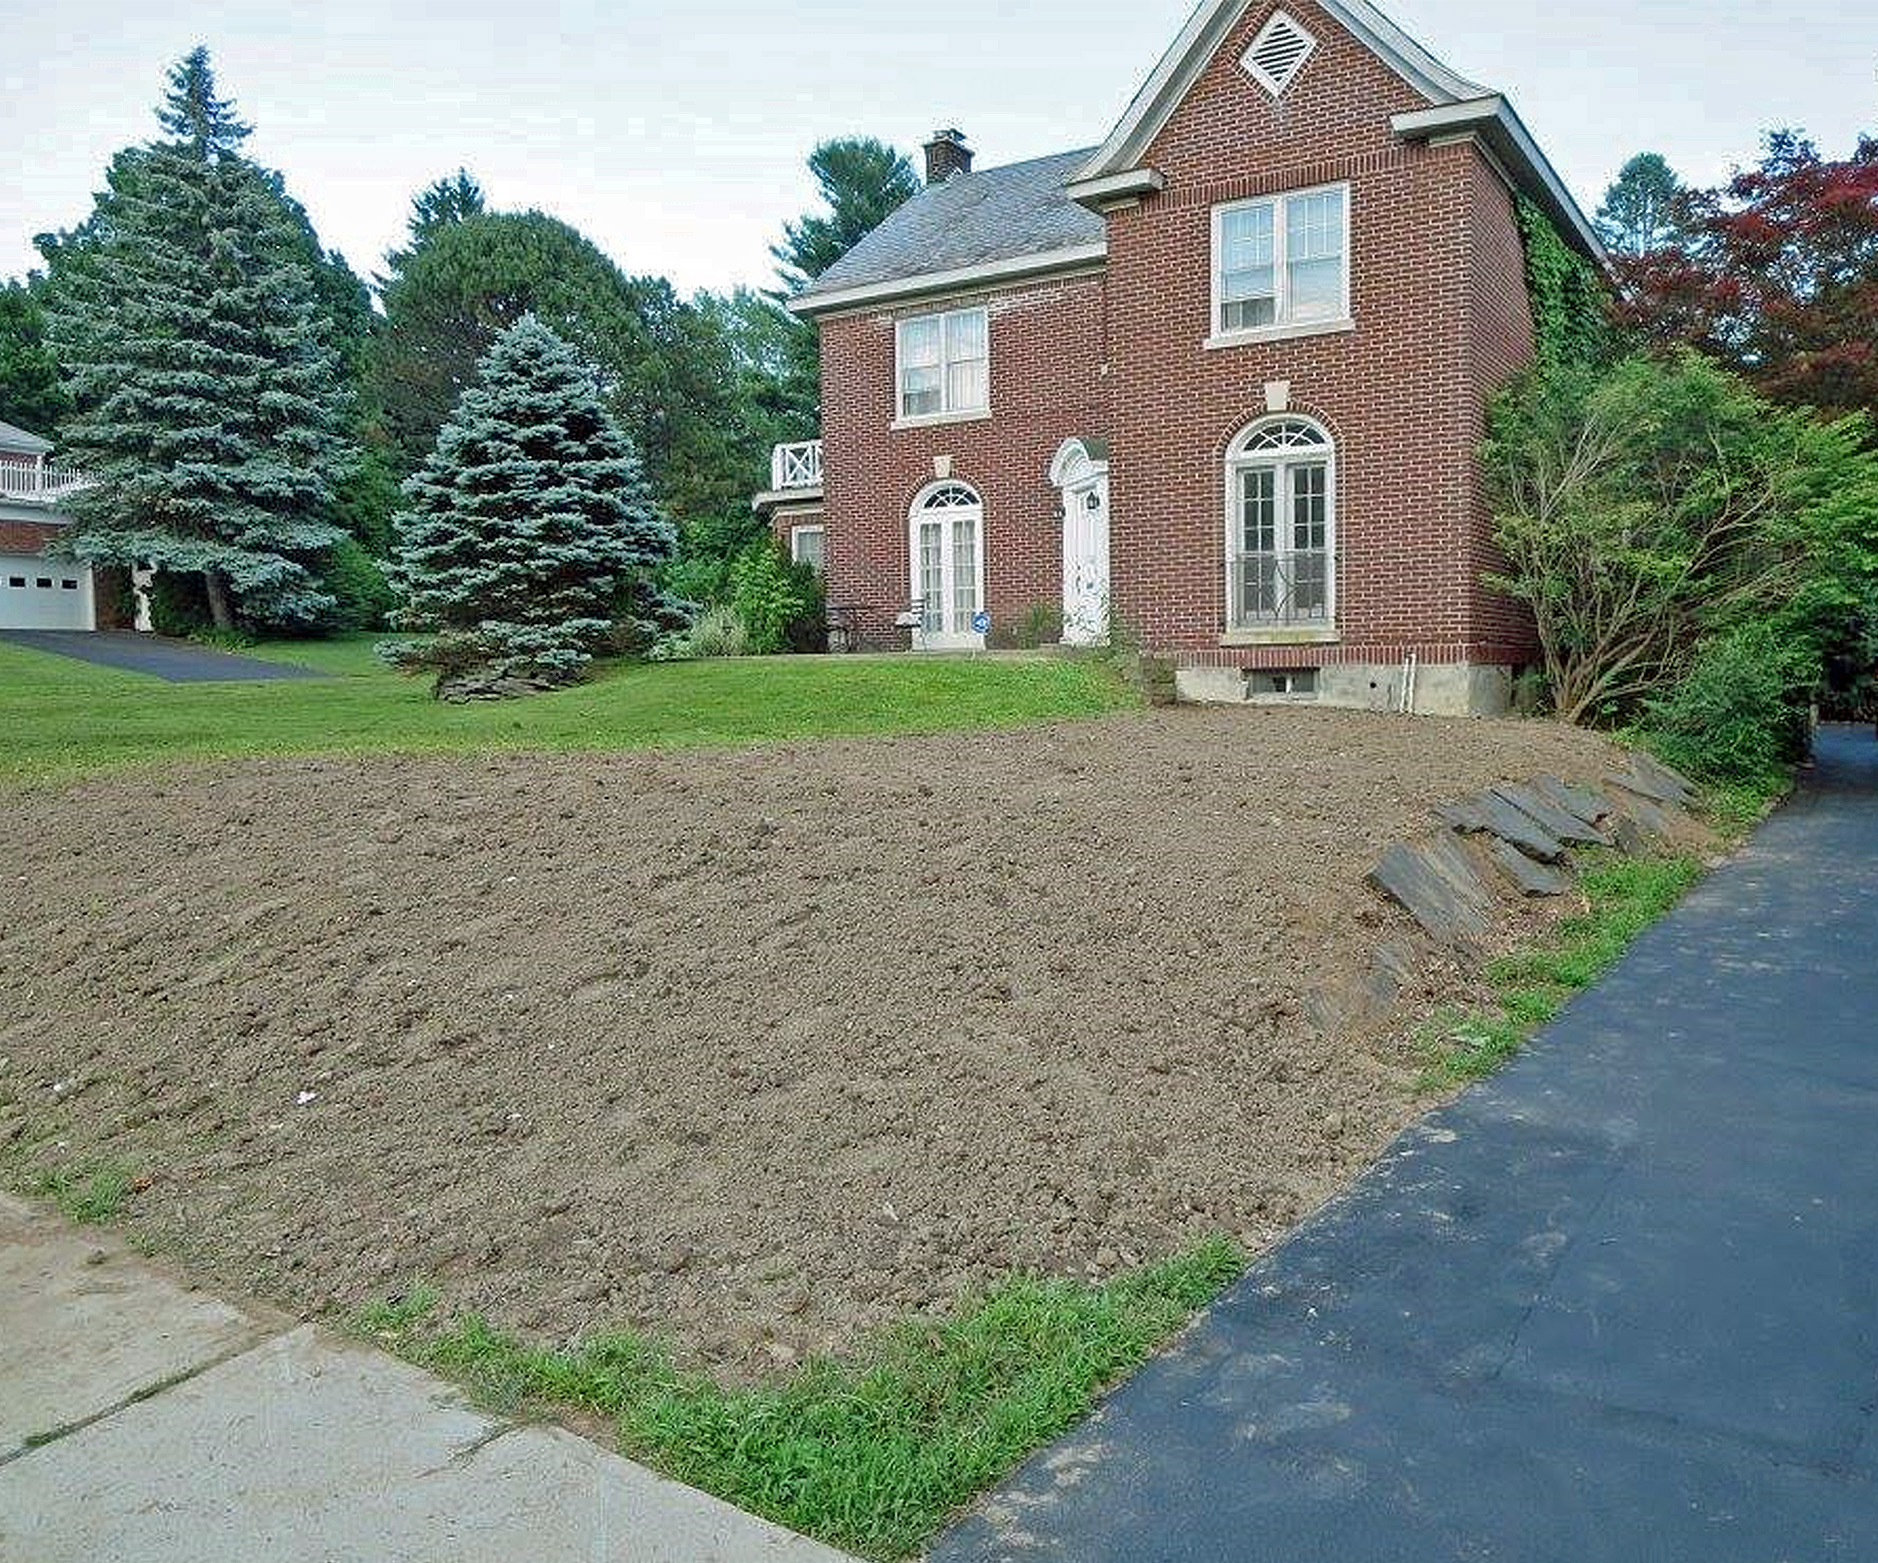 Thumbnail of before image of house with no grass along driveway